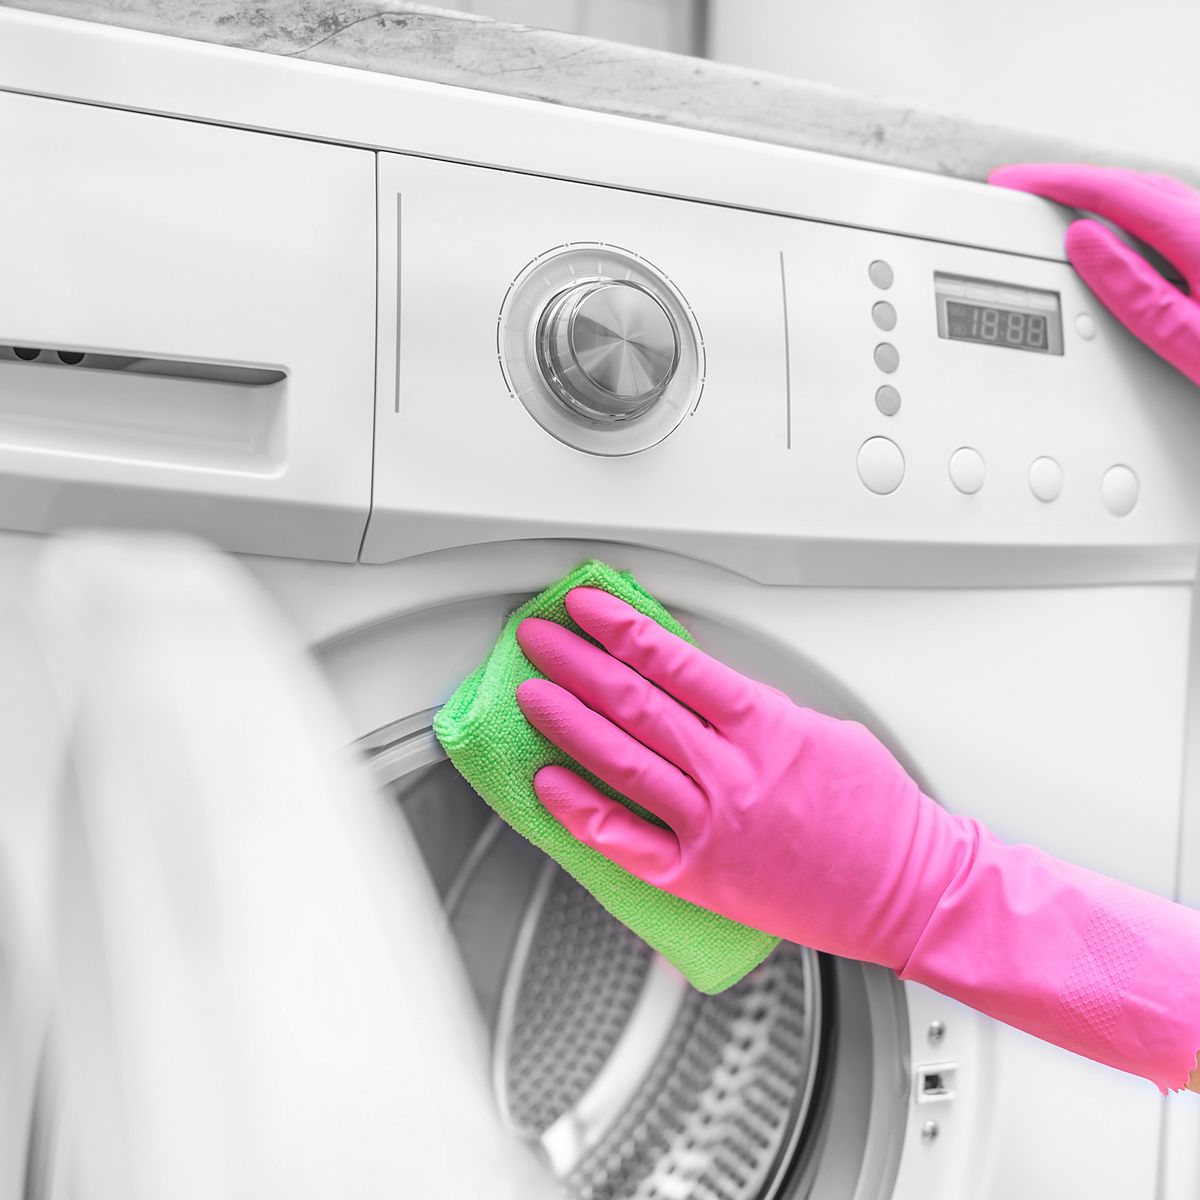 How To Clean a Washing Machine - How to Clean Front or Top Loading